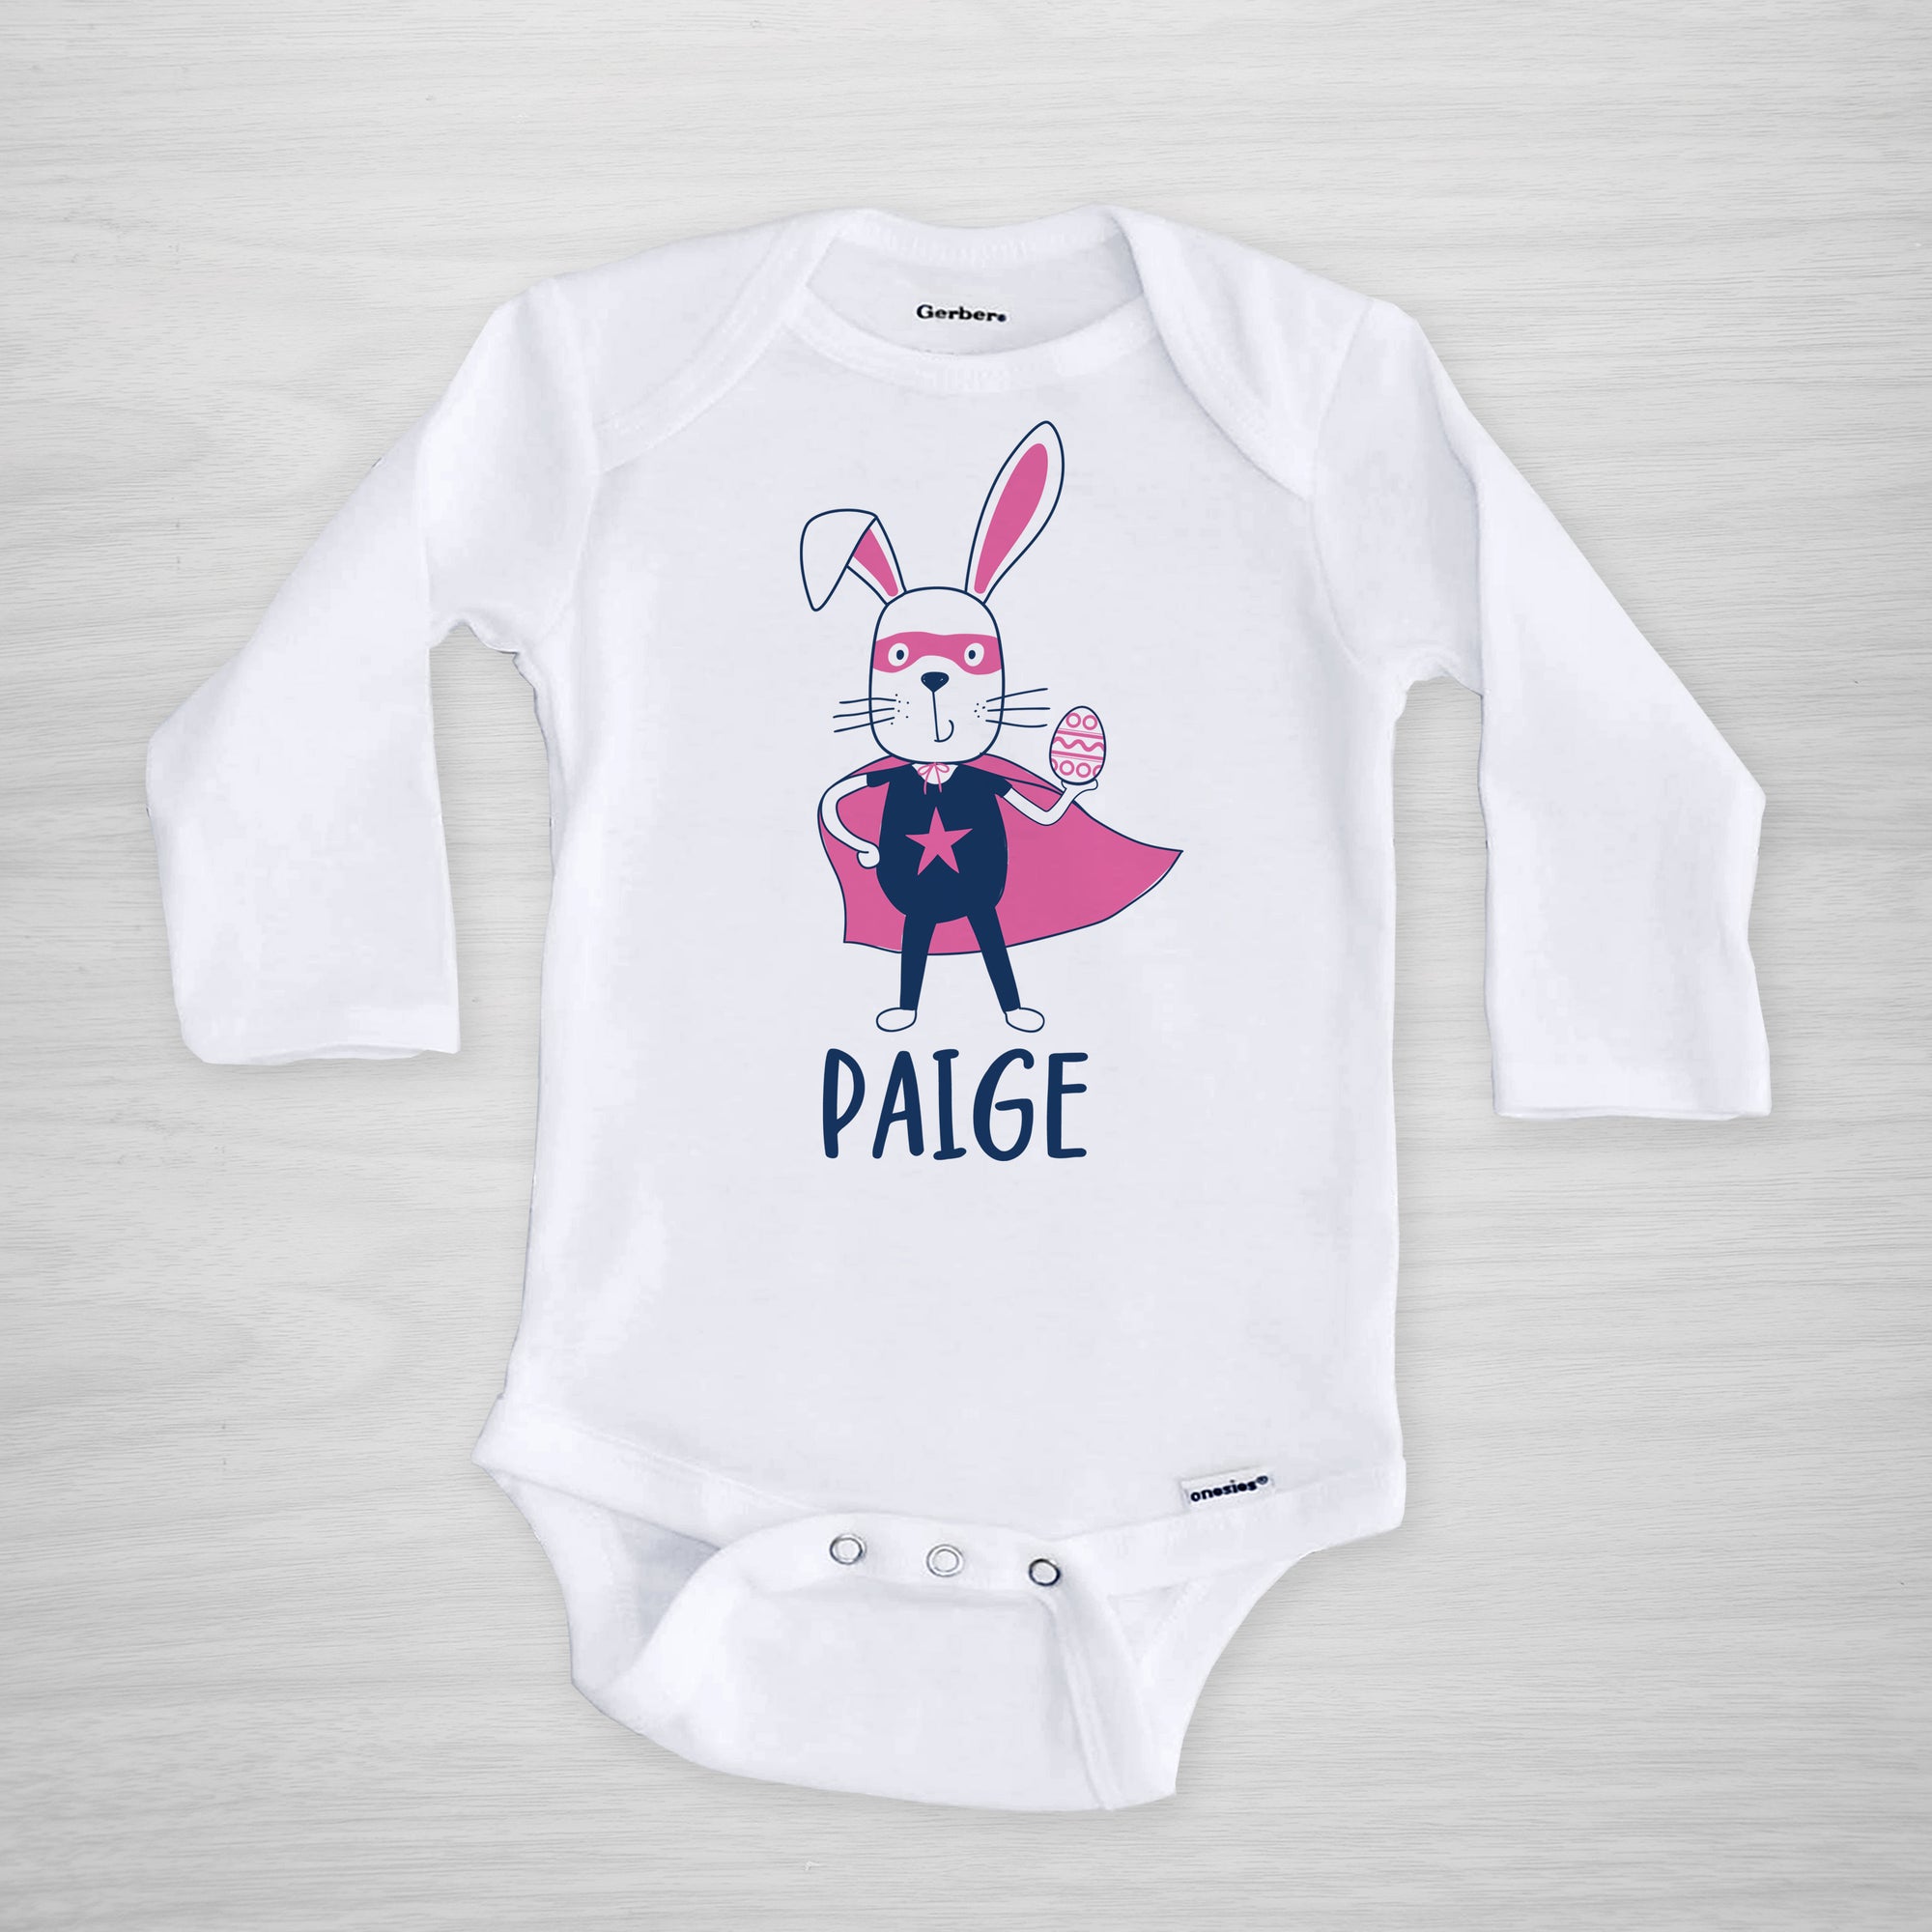 Superhero Easter Bunny with a cape, mask, and egg on this personalized Gerber Onesie®, long sleeved pink